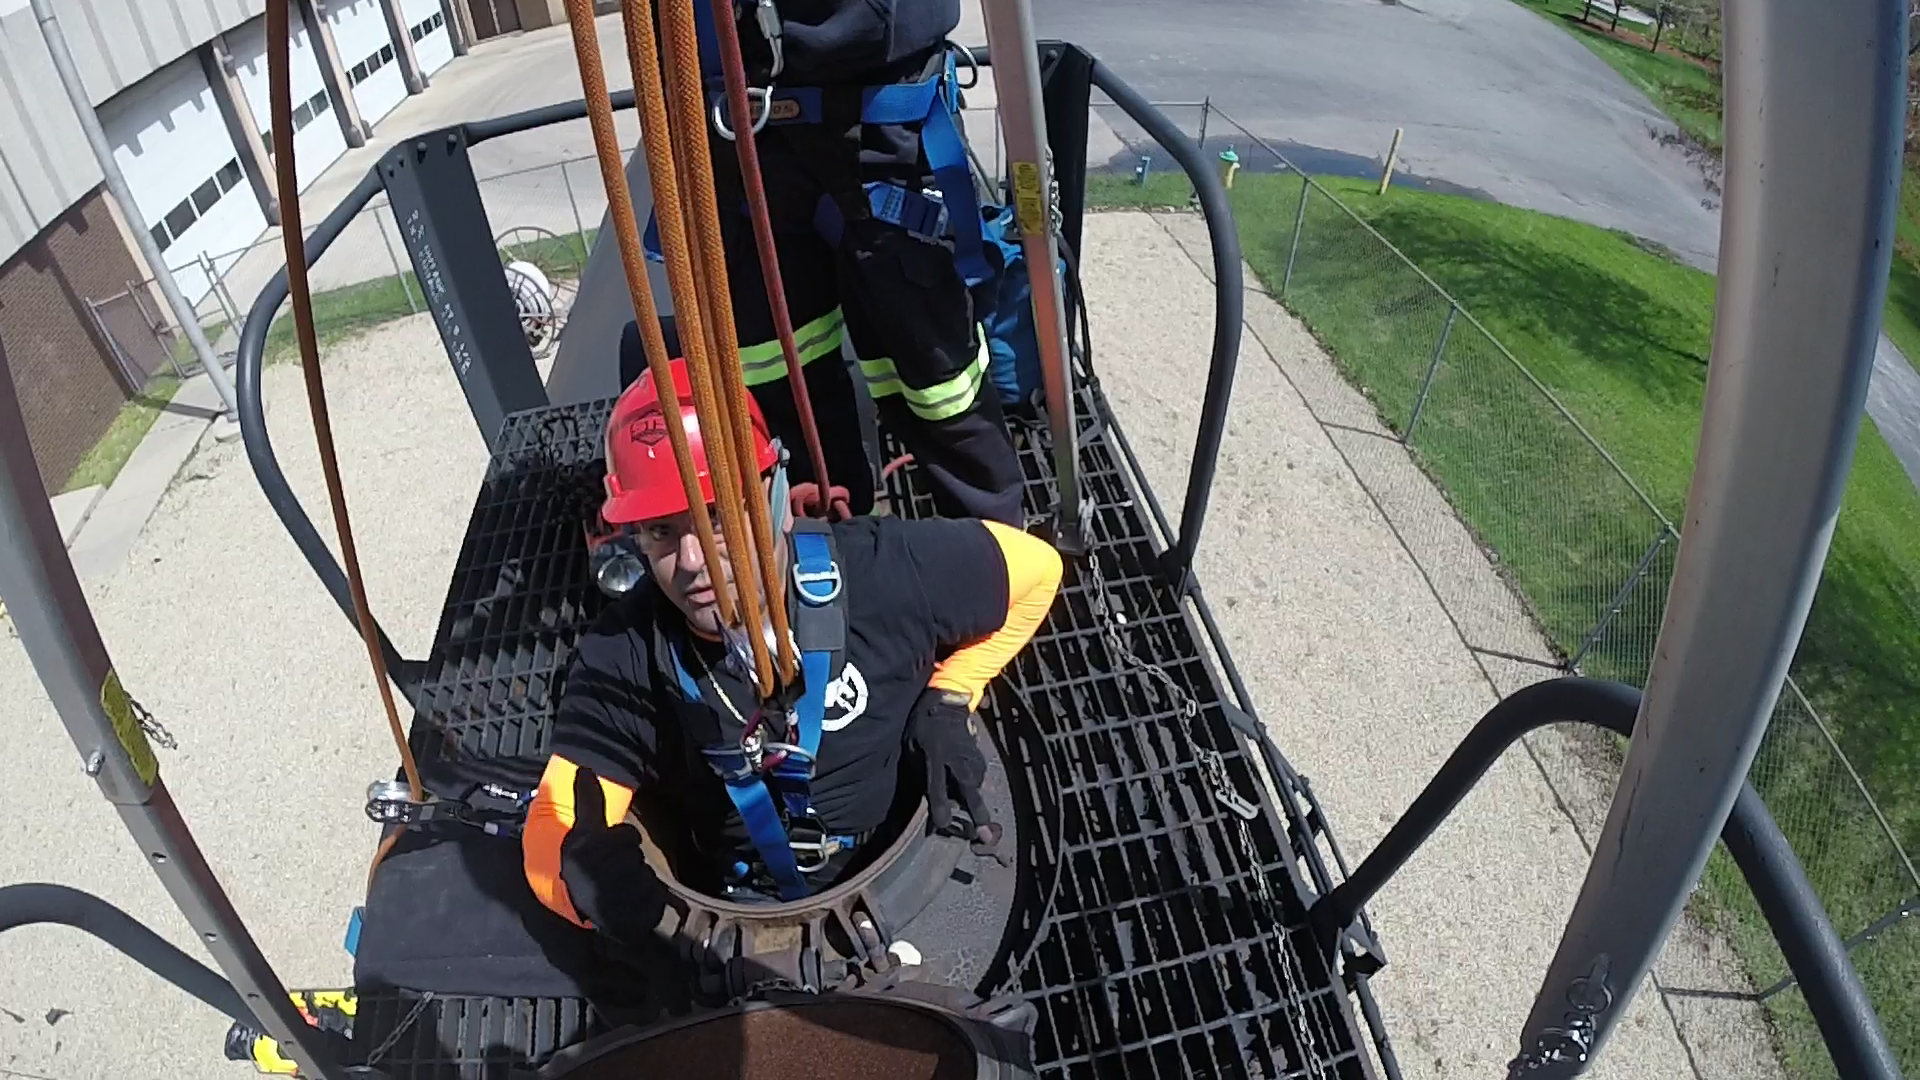 Industrial rescue students emerge from confined space during training